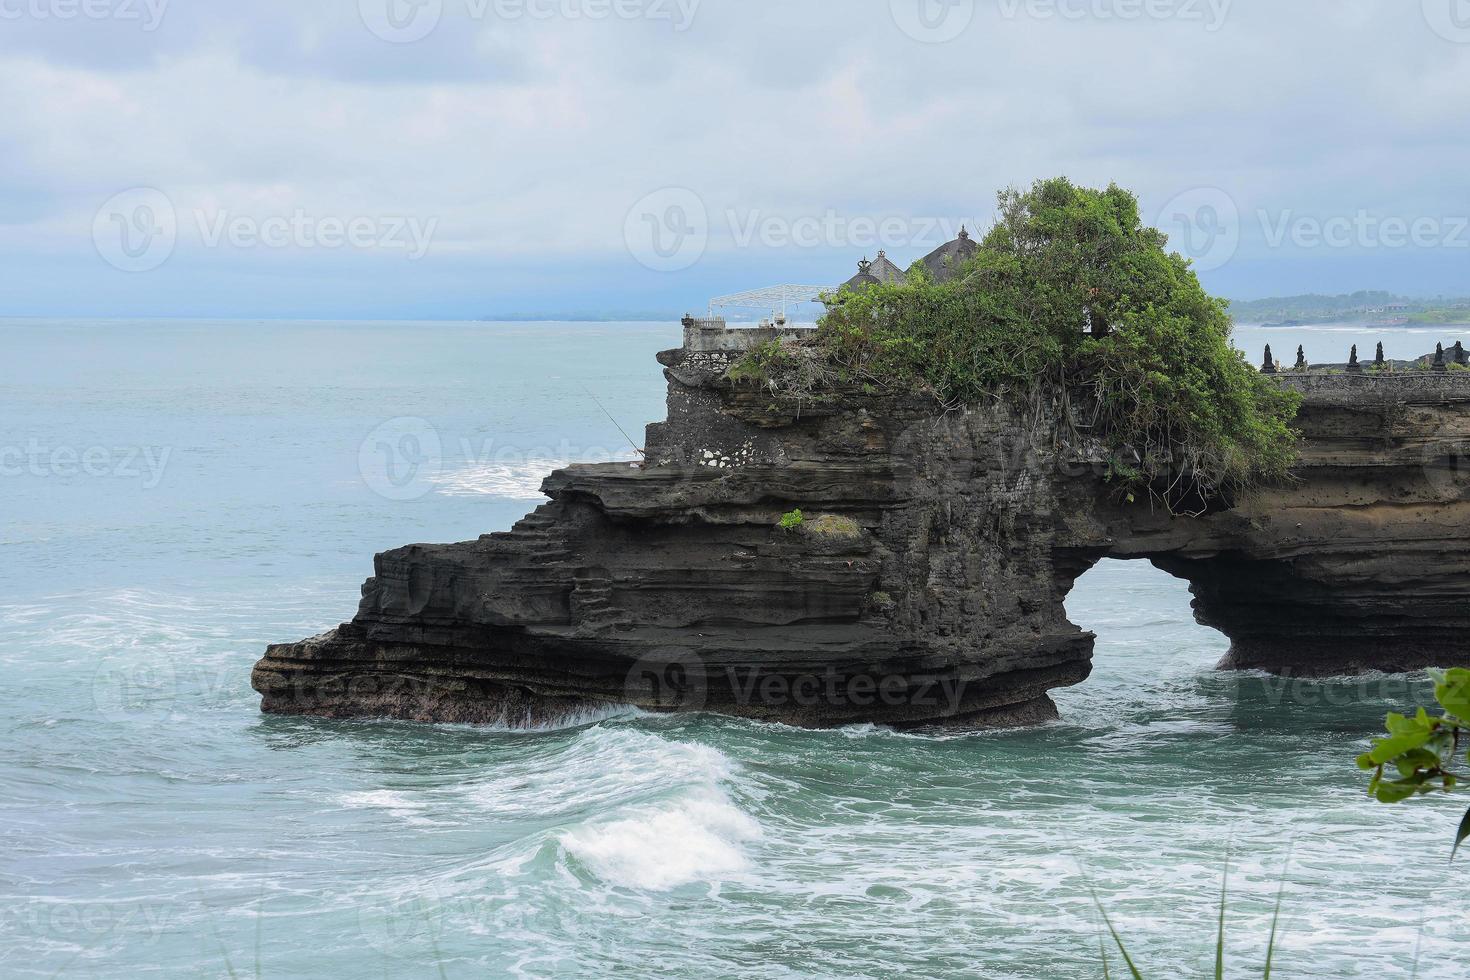 Batu Bolong is the traditional Balinese temple located on small rocky , Bali , Indonesia photo